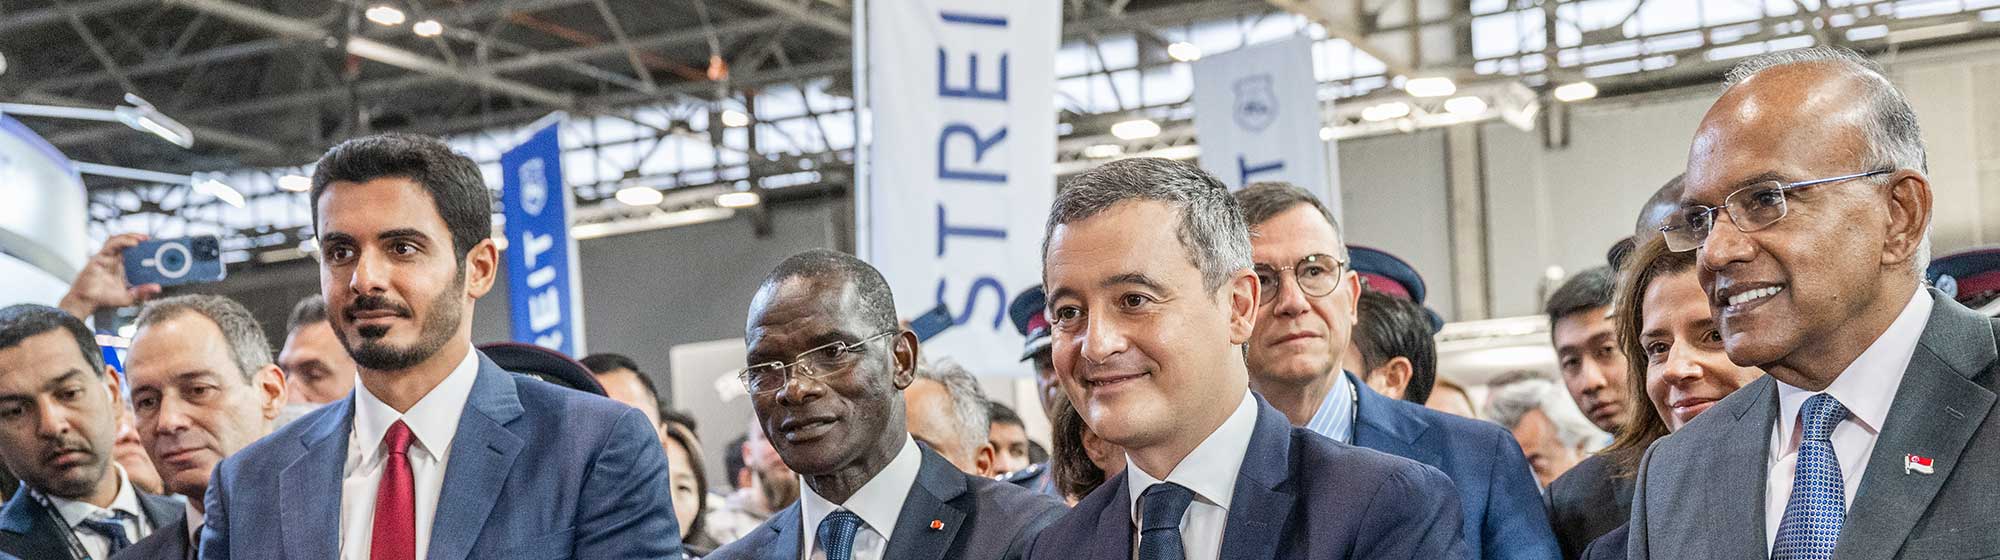 Gérald Darmanin, French Minister of the Interior, accompanied by numerous official French and international delegations at Milipol Paris Inauguration  